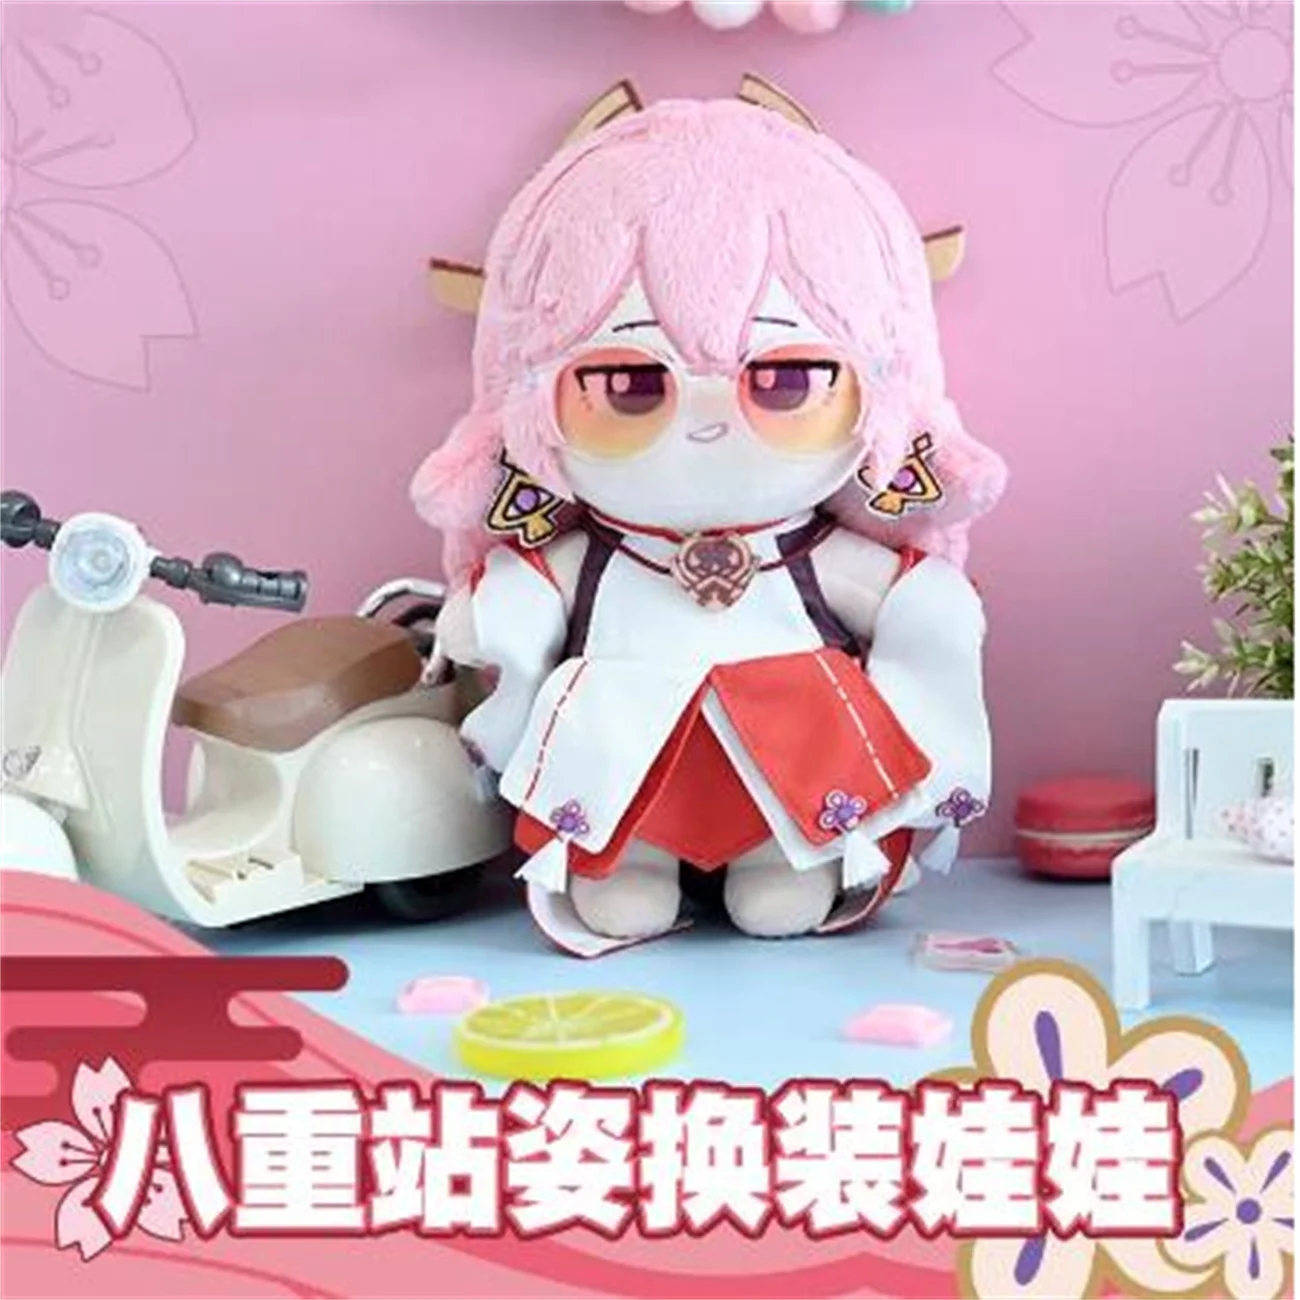 

Anime Game Genshin Impact Yae Miko 20cm Plush Doll Change Clothes Outfit Toy Soft Cute Plushie Cosplay Fan Gift CM